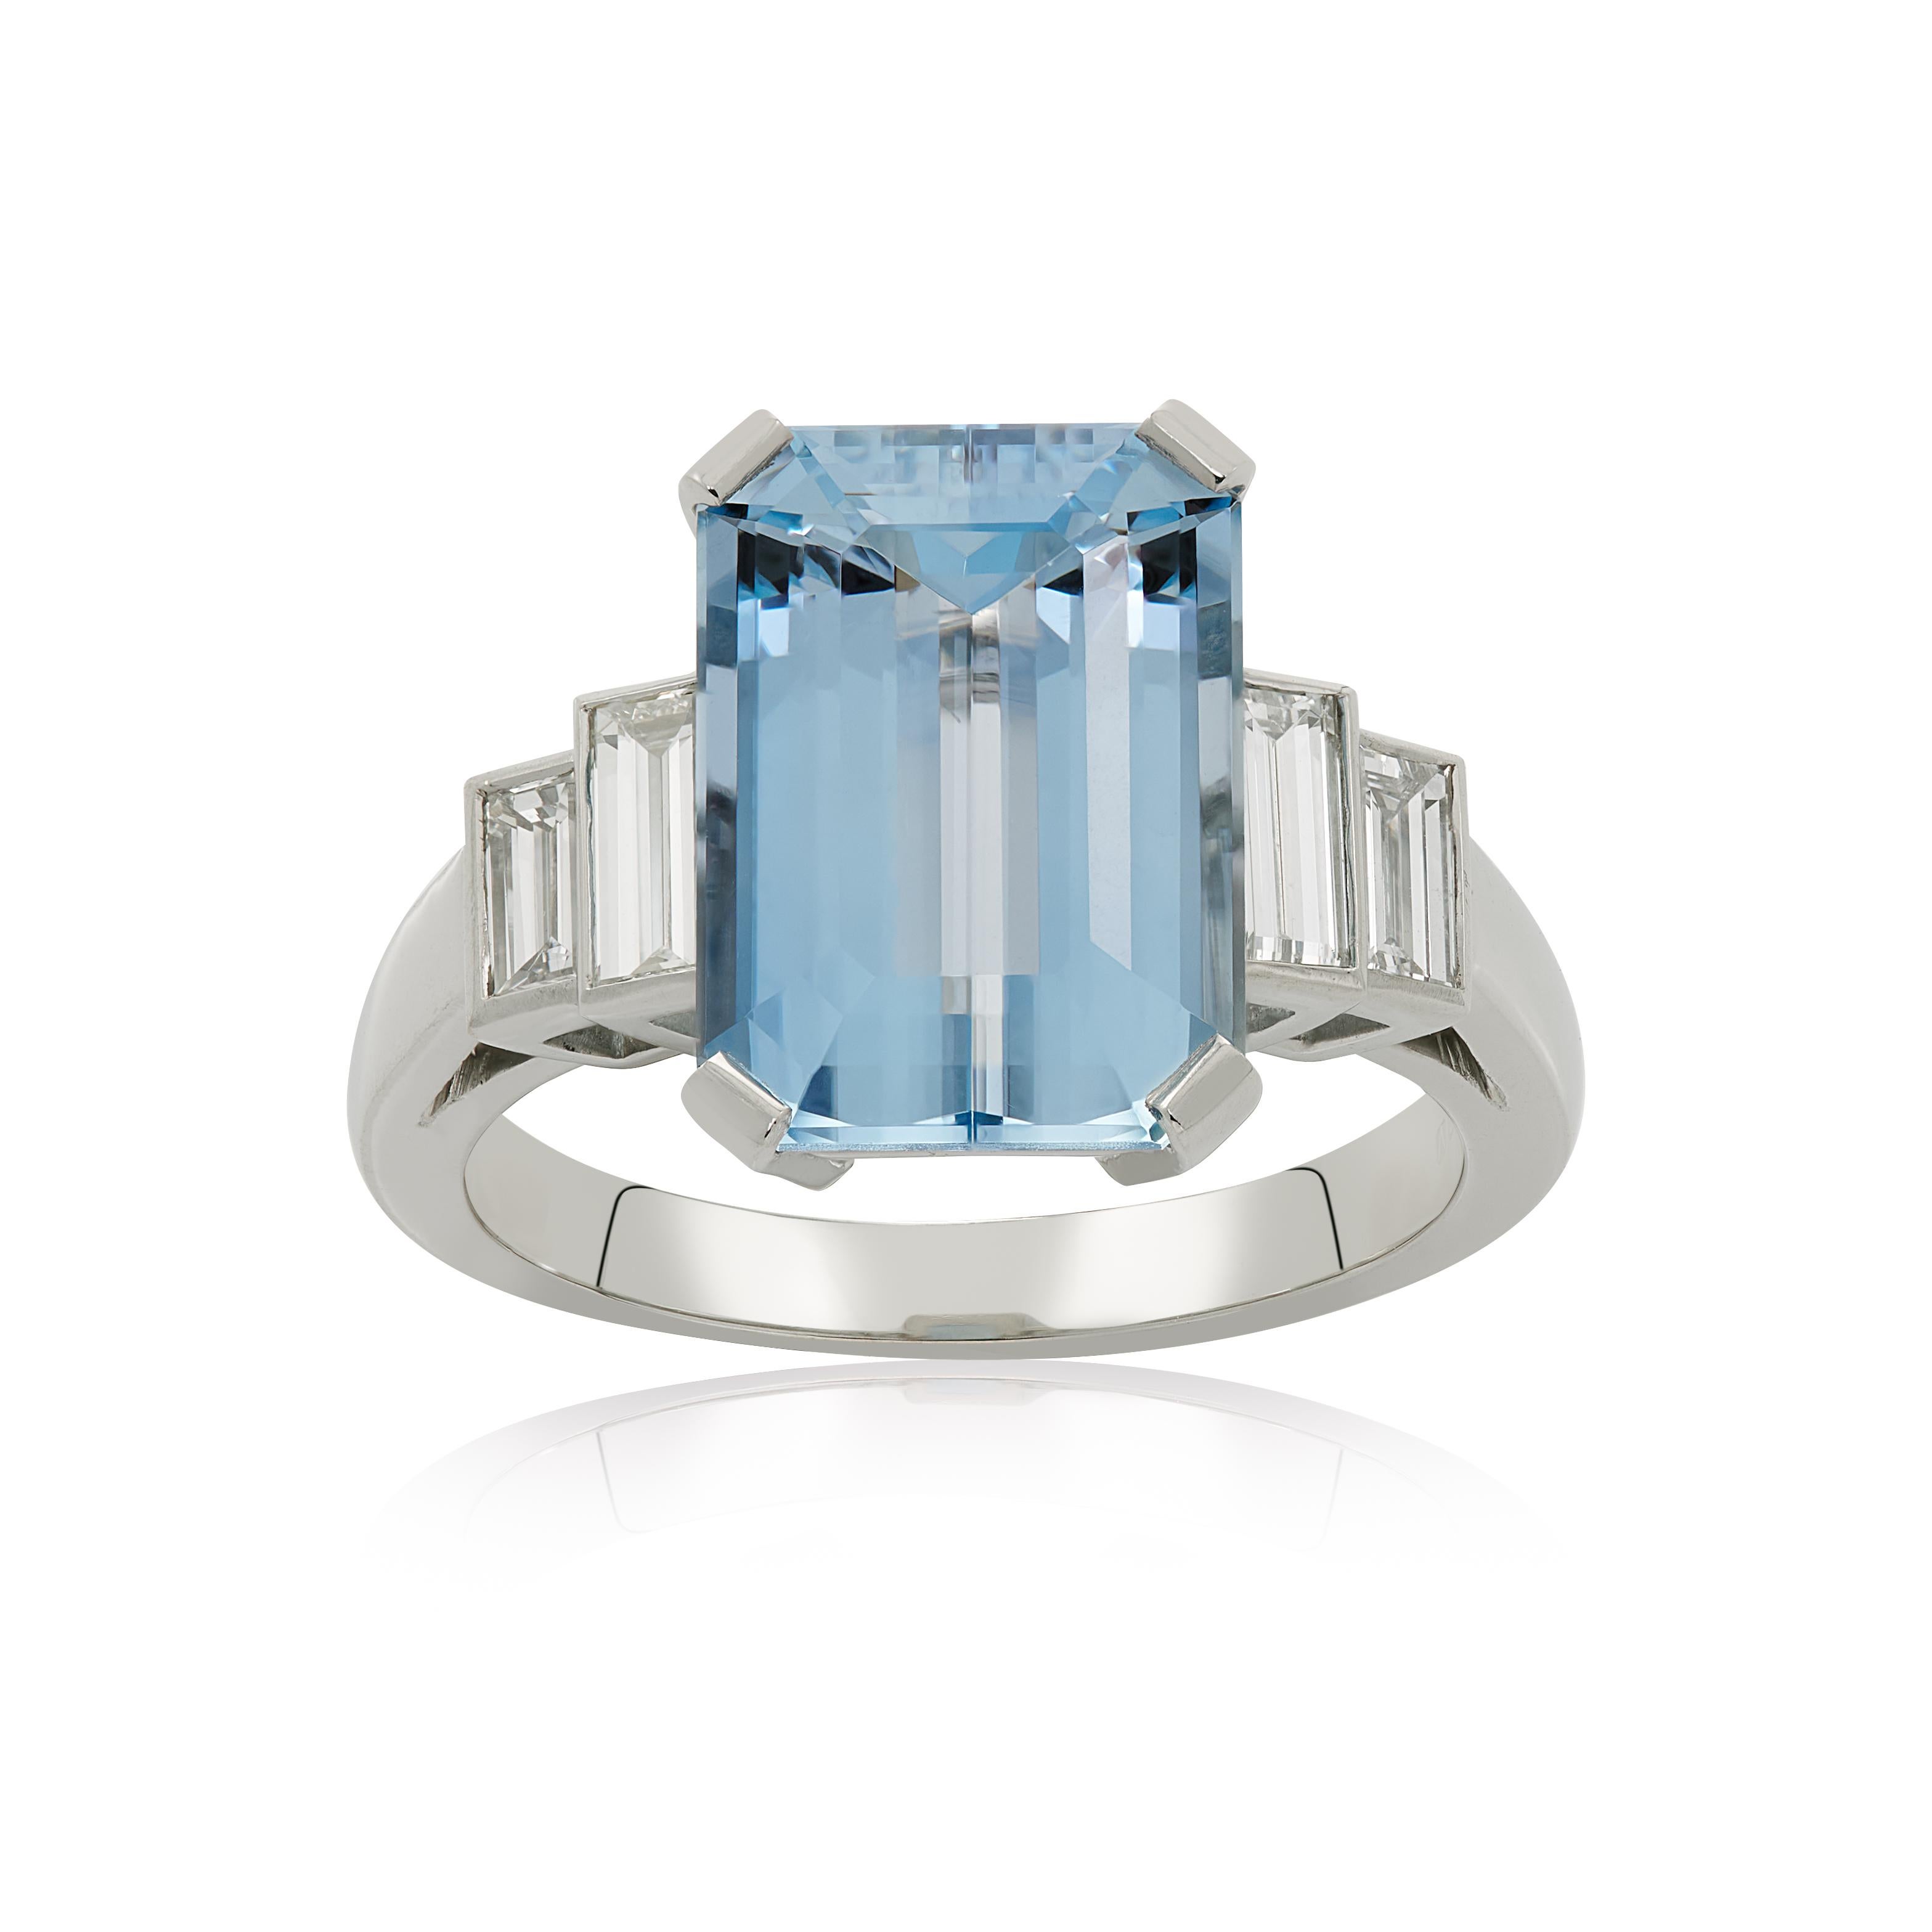 E Wolfe & Co Handmade Platinum Aquamarine and Diamond baguette Ring. The emerald-cut aquamarine centre stone weighs 4.33 carats and has two pairs of baguette diamonds set to either side of the platinum ring band. The baguette diamonds have a total